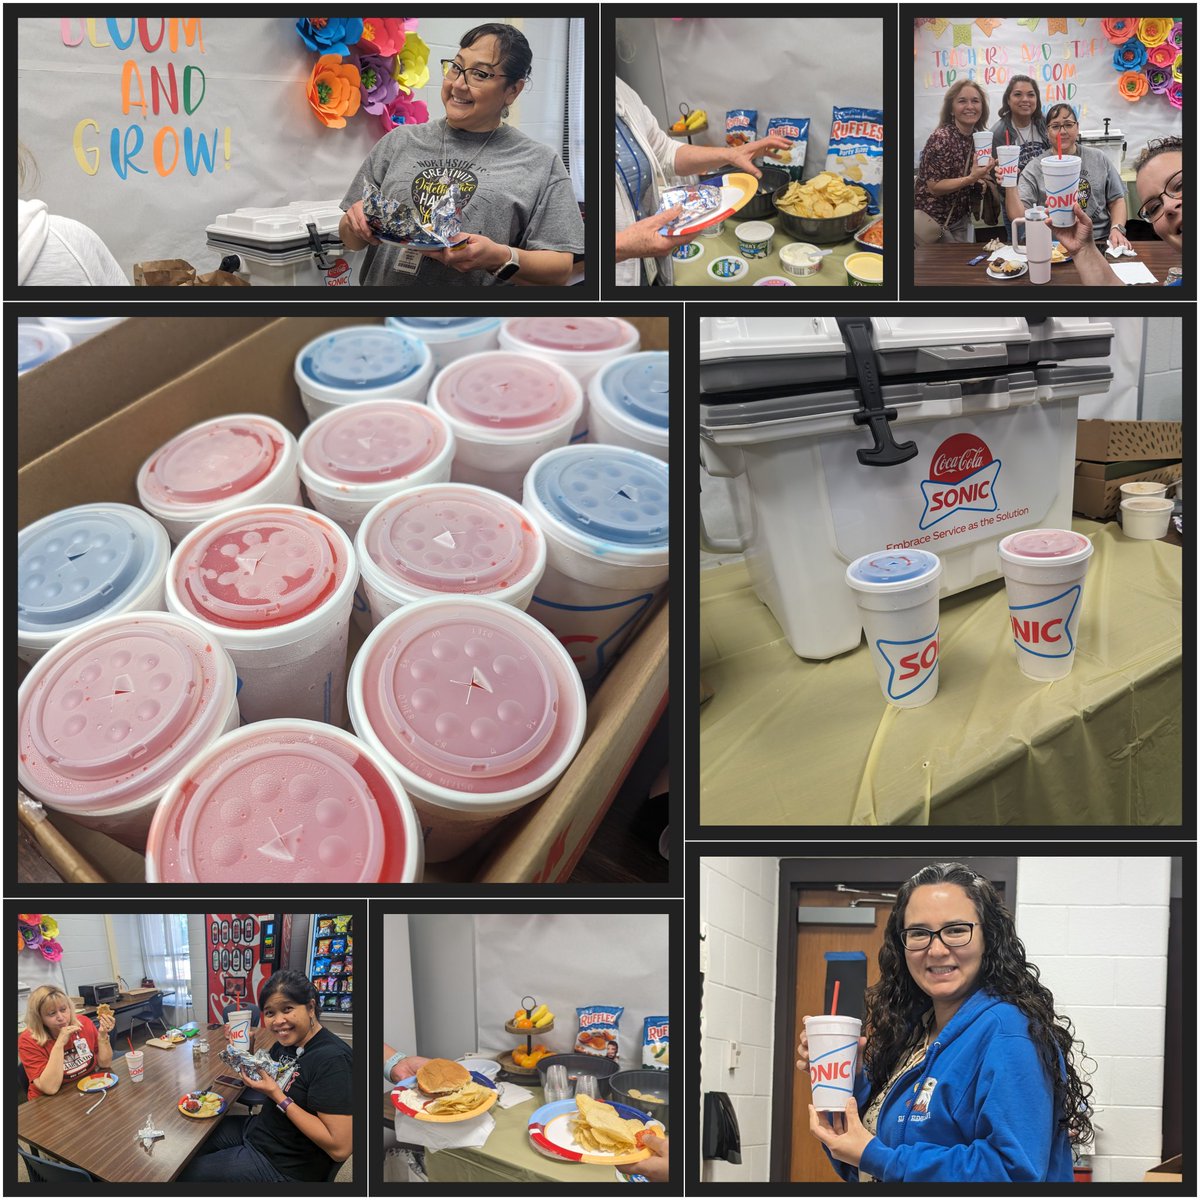 Sonic for the win! Thank you so much to Sonic, Simpkins family, and Prince of Peace for all of today's goodies. Elrod teachers and staff are very grateful! @sonicdrivein PrinceofPeace @nothingbundt